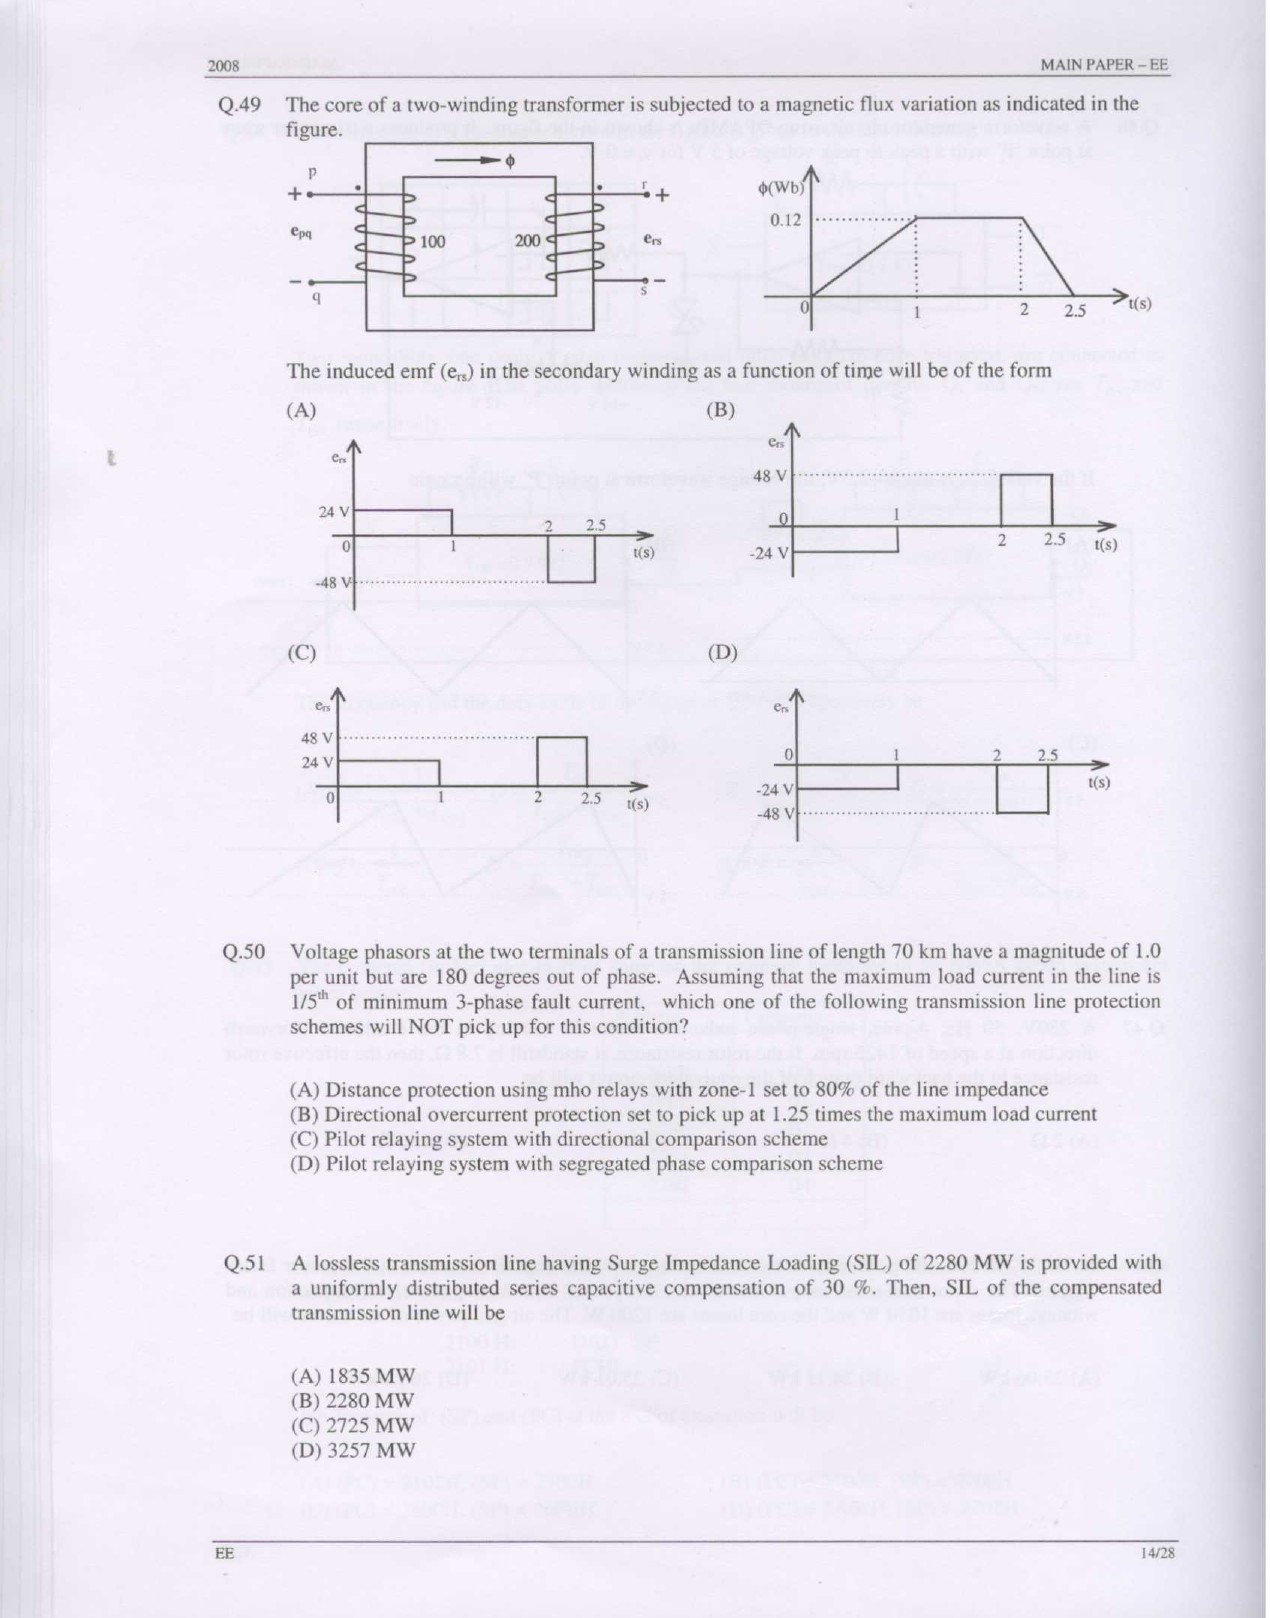 GATE Exam Question Paper 2008 Electrical Engineering 14